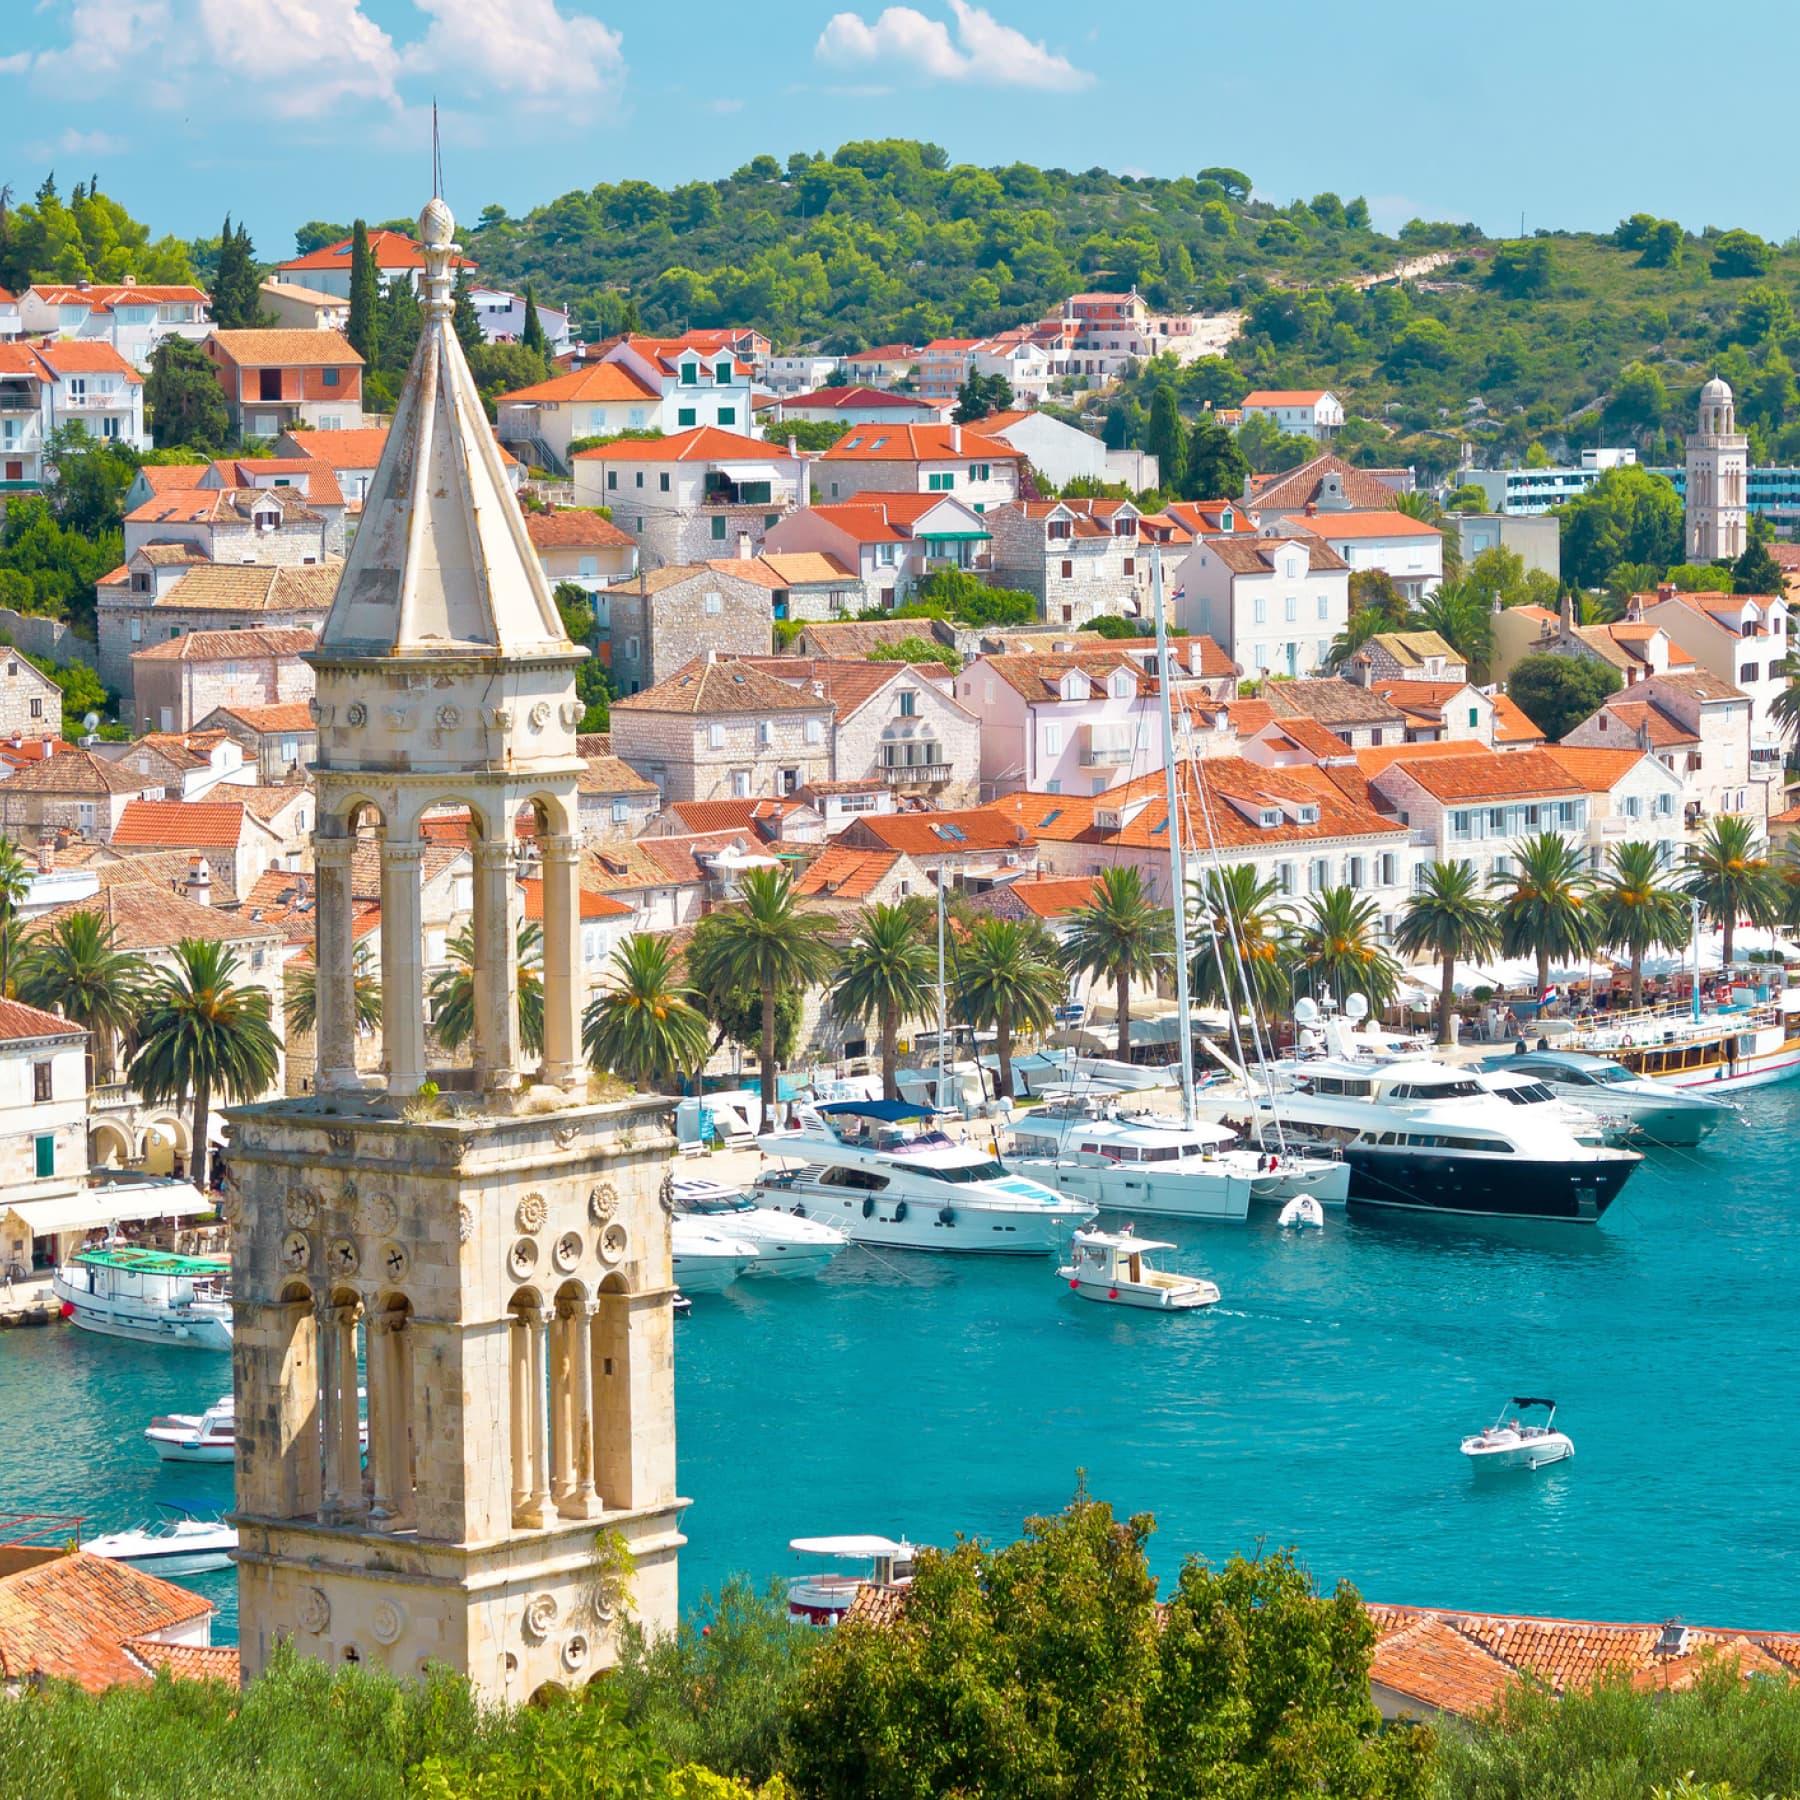 Hvar is one of the best places to visit in 2023